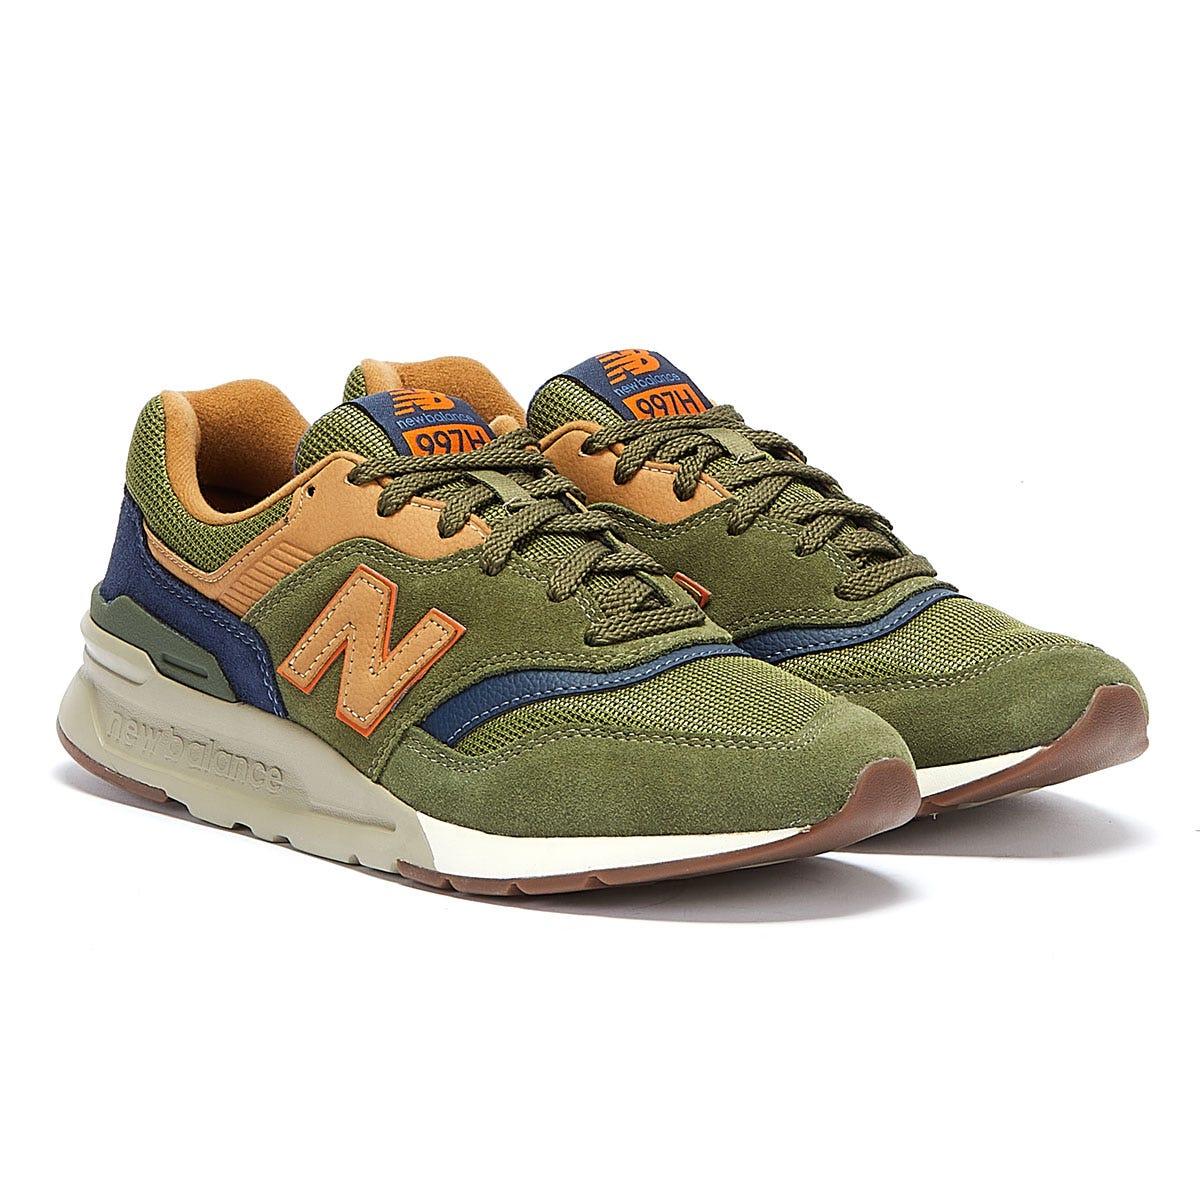 New Balance Leather 997h Dark Trainers in Green for Men - Lyst